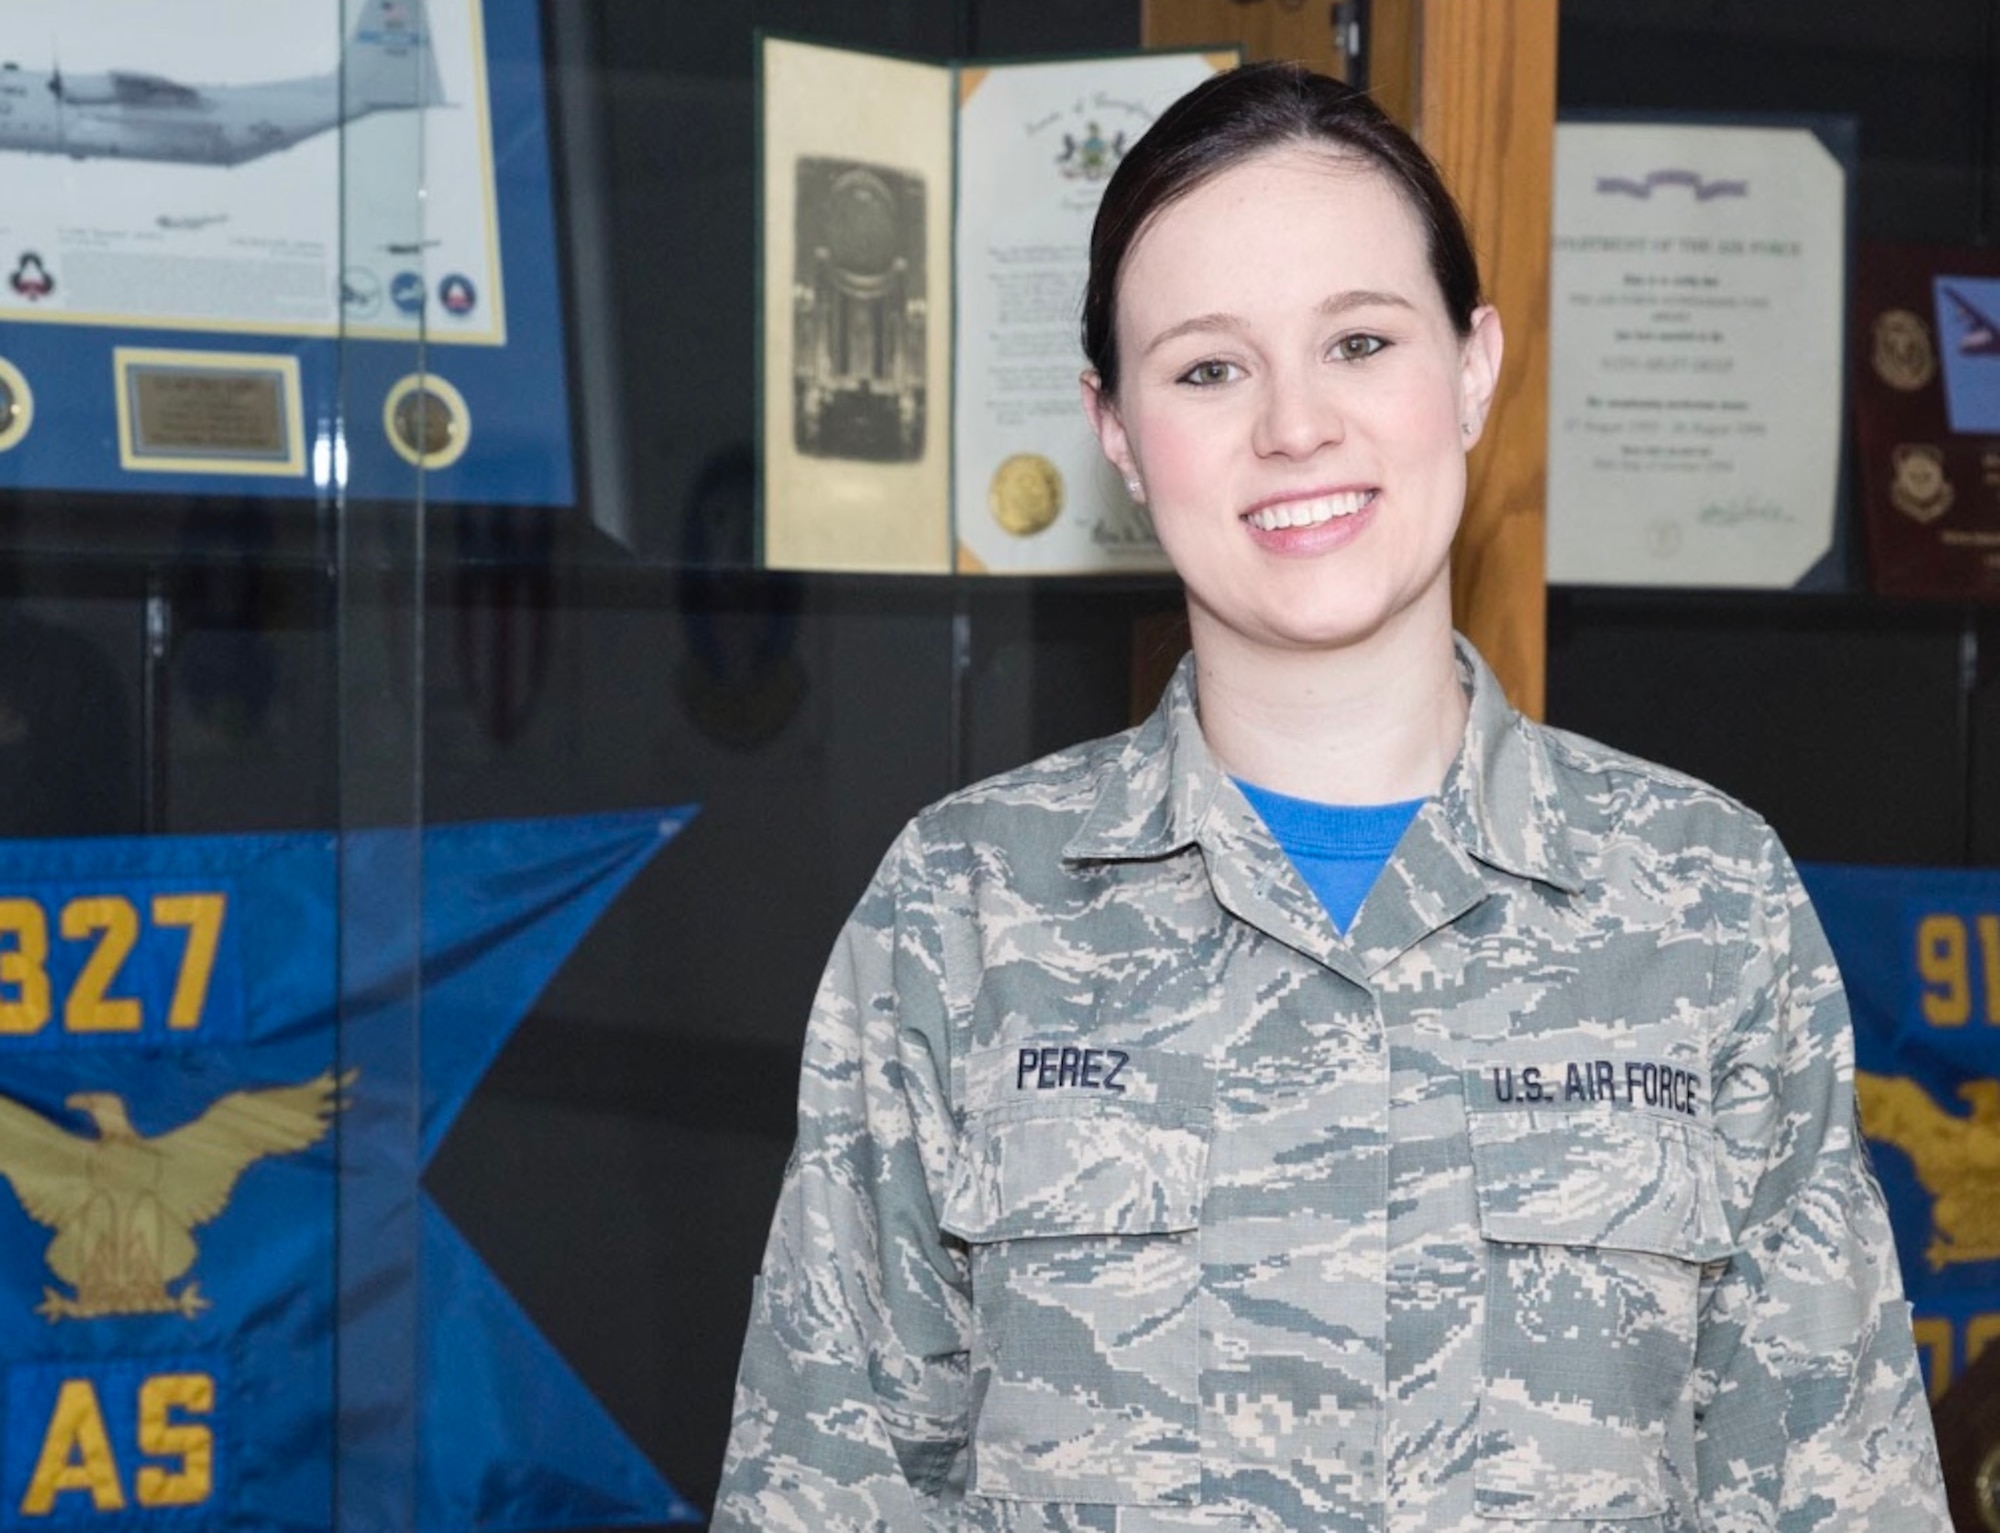 U.S. Air Force Reserve Staff Sgt. Danielle Perez poses in front of the 327th Airlift Squadron’s heritage display case. She is a commander’s support staff personnelist and is the oldest of four siblings currently stationed at Little Rock Air Force Base. (Courtesy photo)